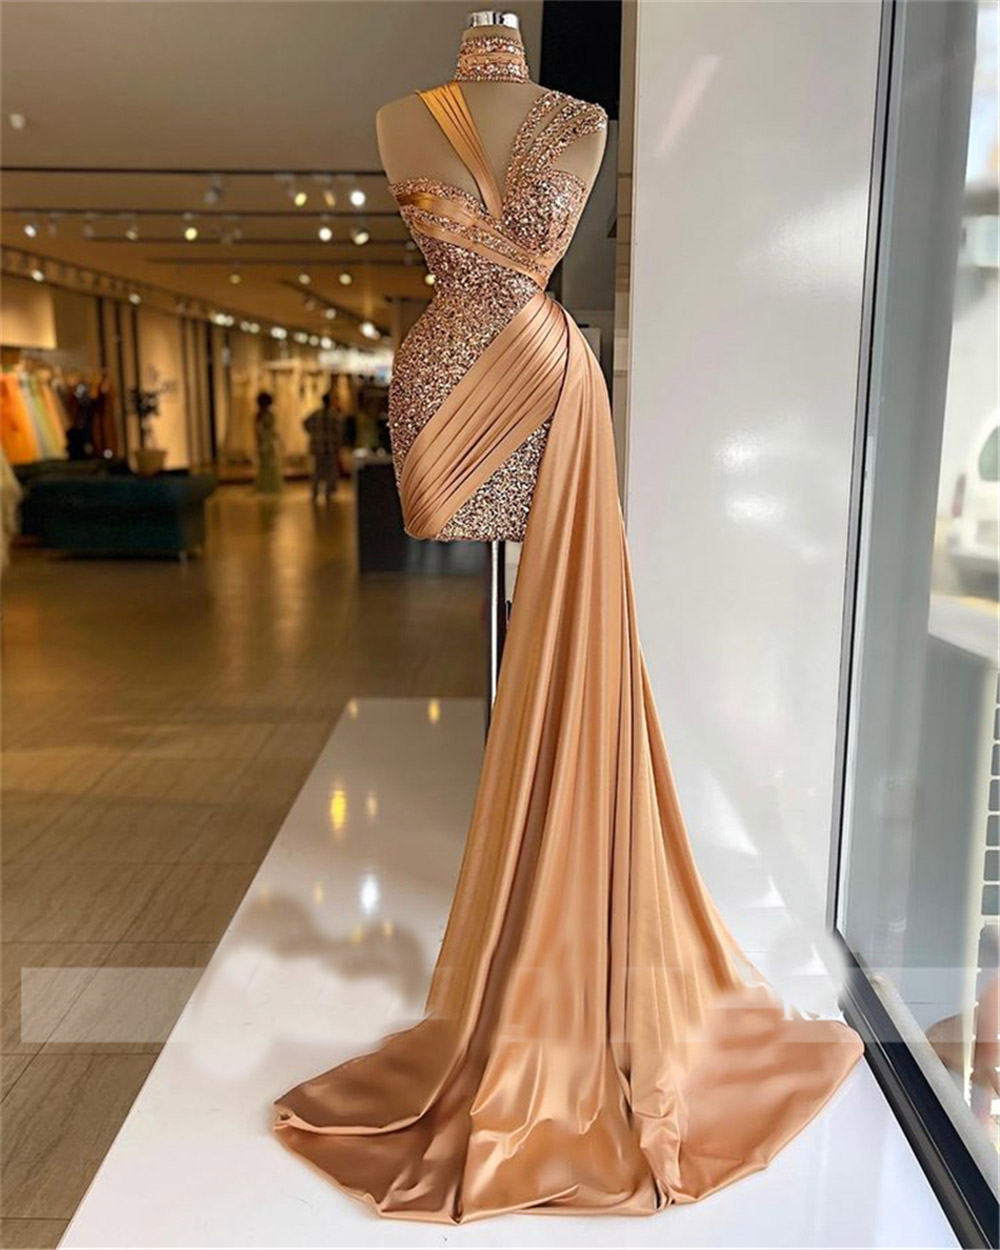 Champagne Prom Dresses, Sparkly Evening Dresses, Sheath Prom Dresses, Sashes Prom Dresses, Pleats Evening Dresses, Sequins Evening Dresses,